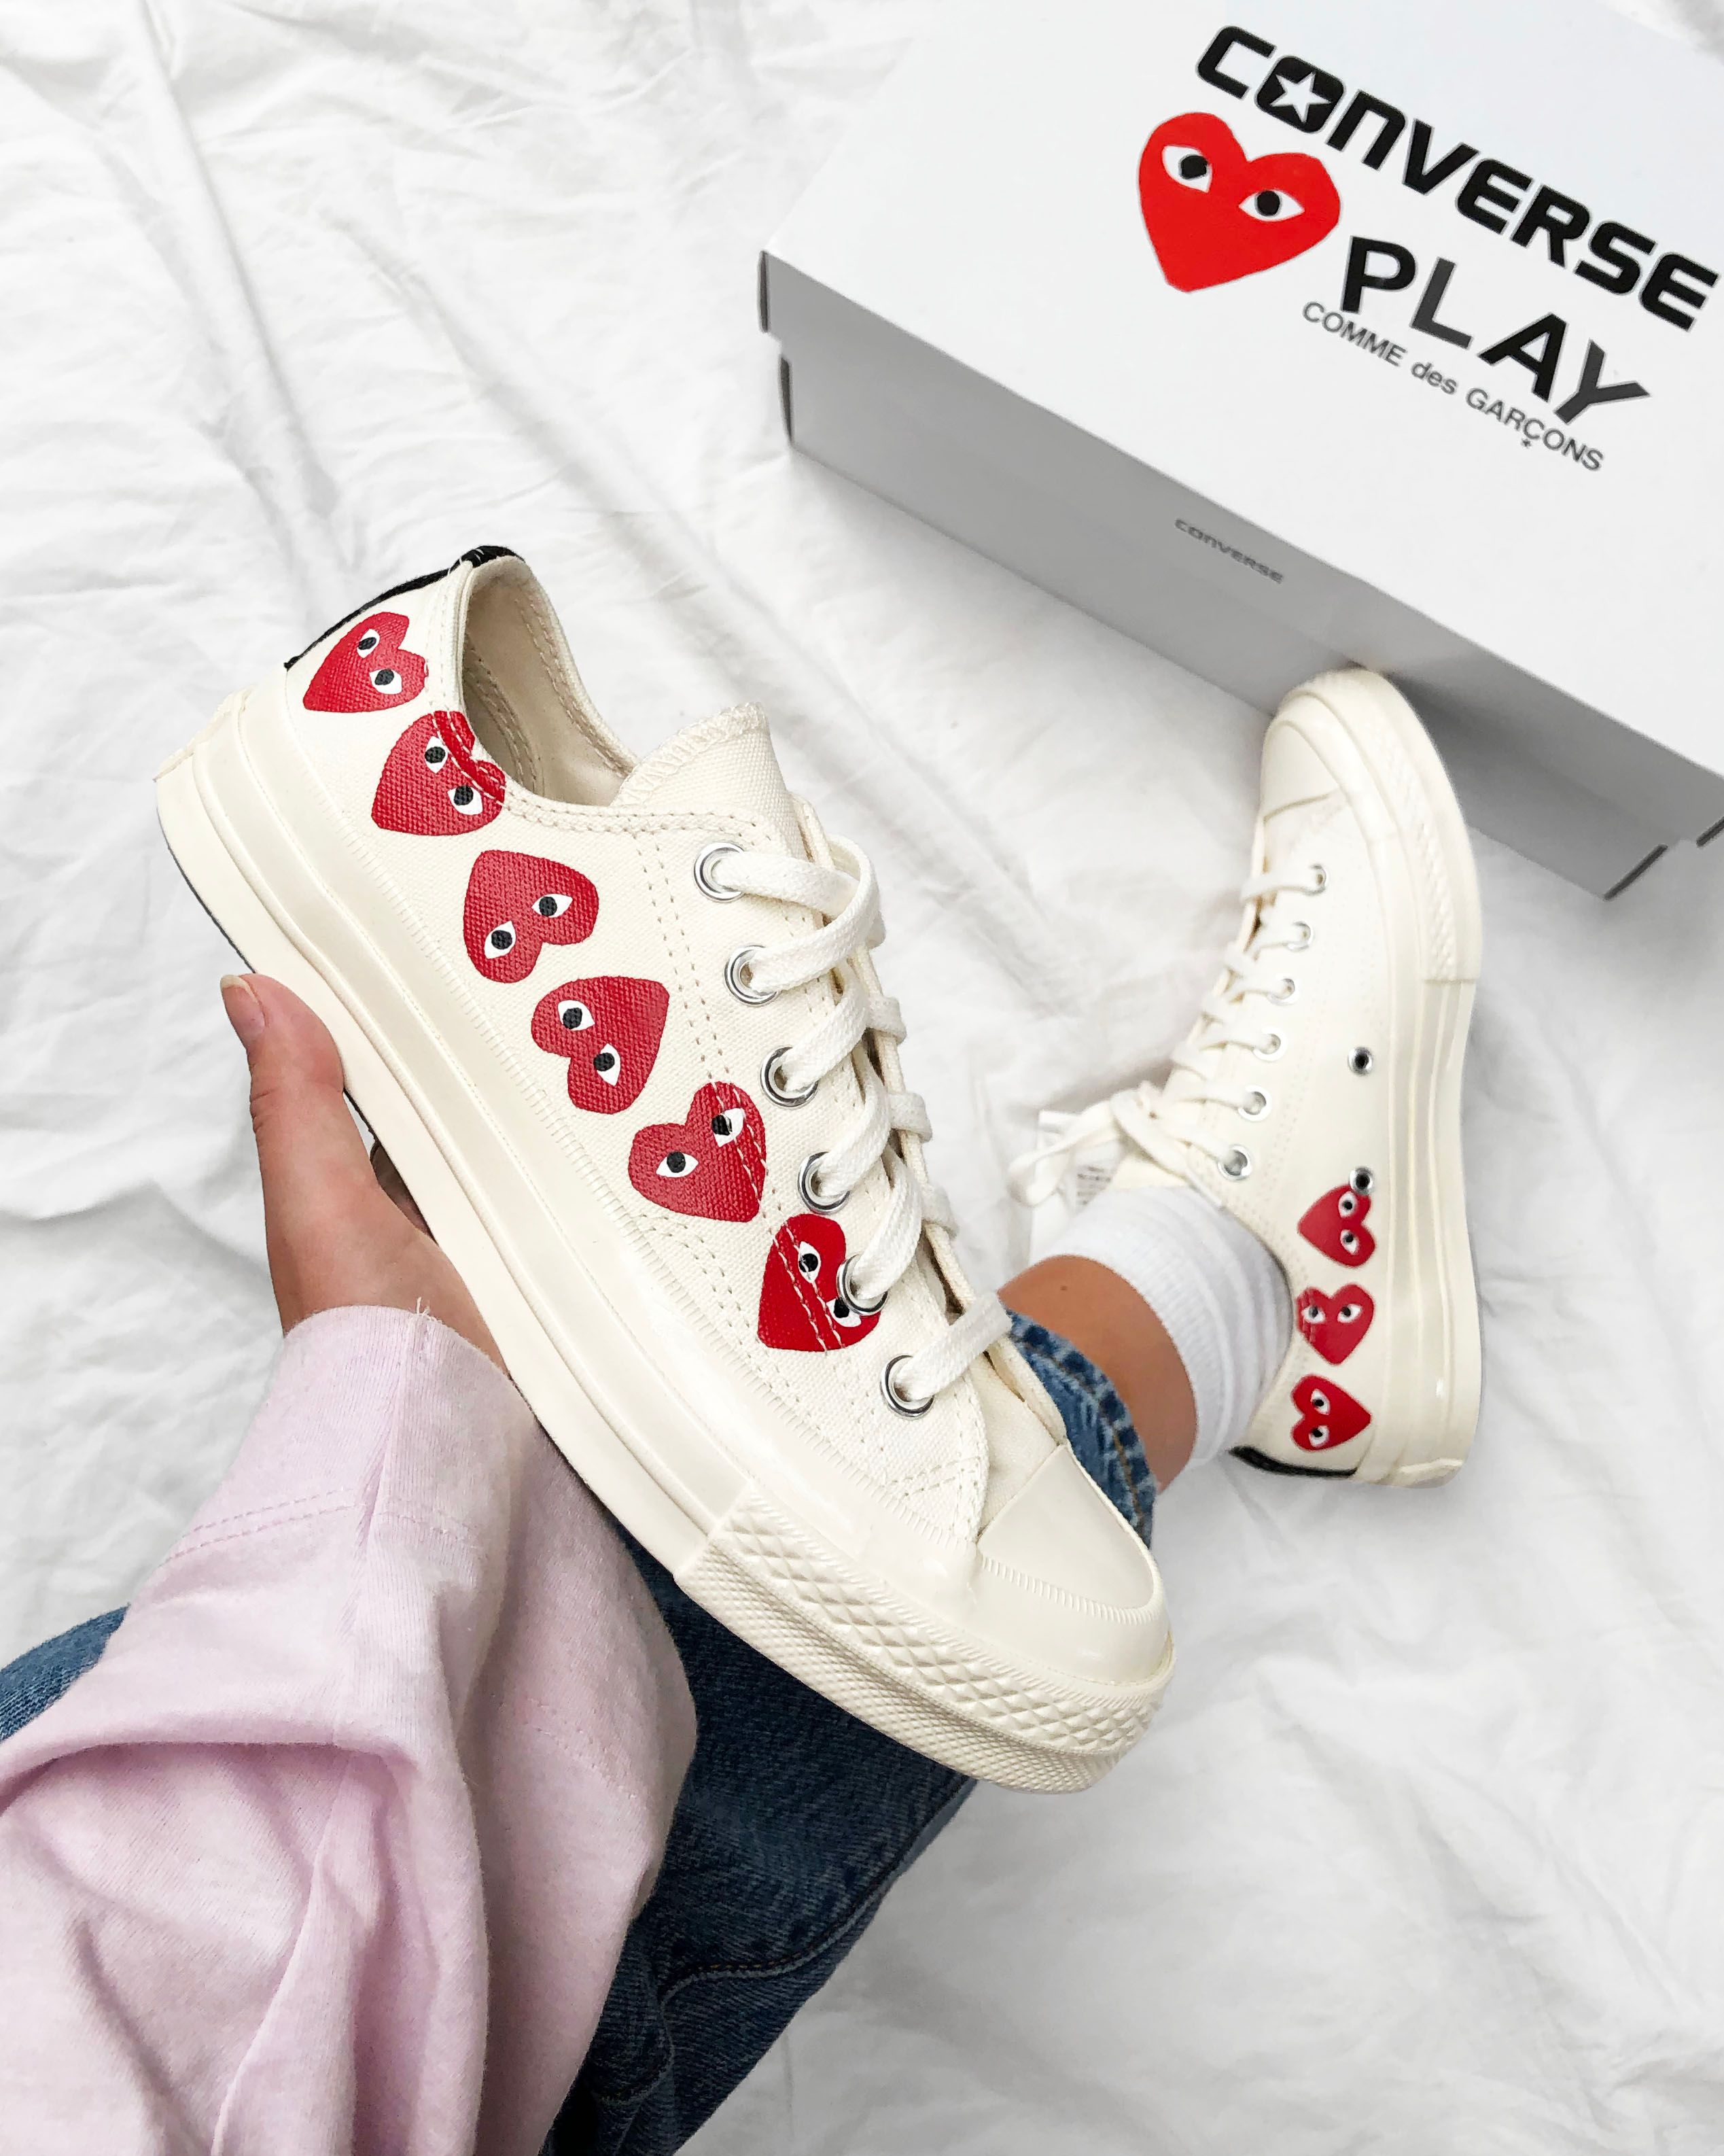 The Sole on Twitter: "Take 20% OFF the Comme Des Garcons x Converse sneaks at Selfridges ♥️ Black Low https://t.co/eQNUjexajc White Low &gt; https://t.co/tbBG7E2GQC Black Polka Low &gt; https://t.co/GChNgprkIW Khaki